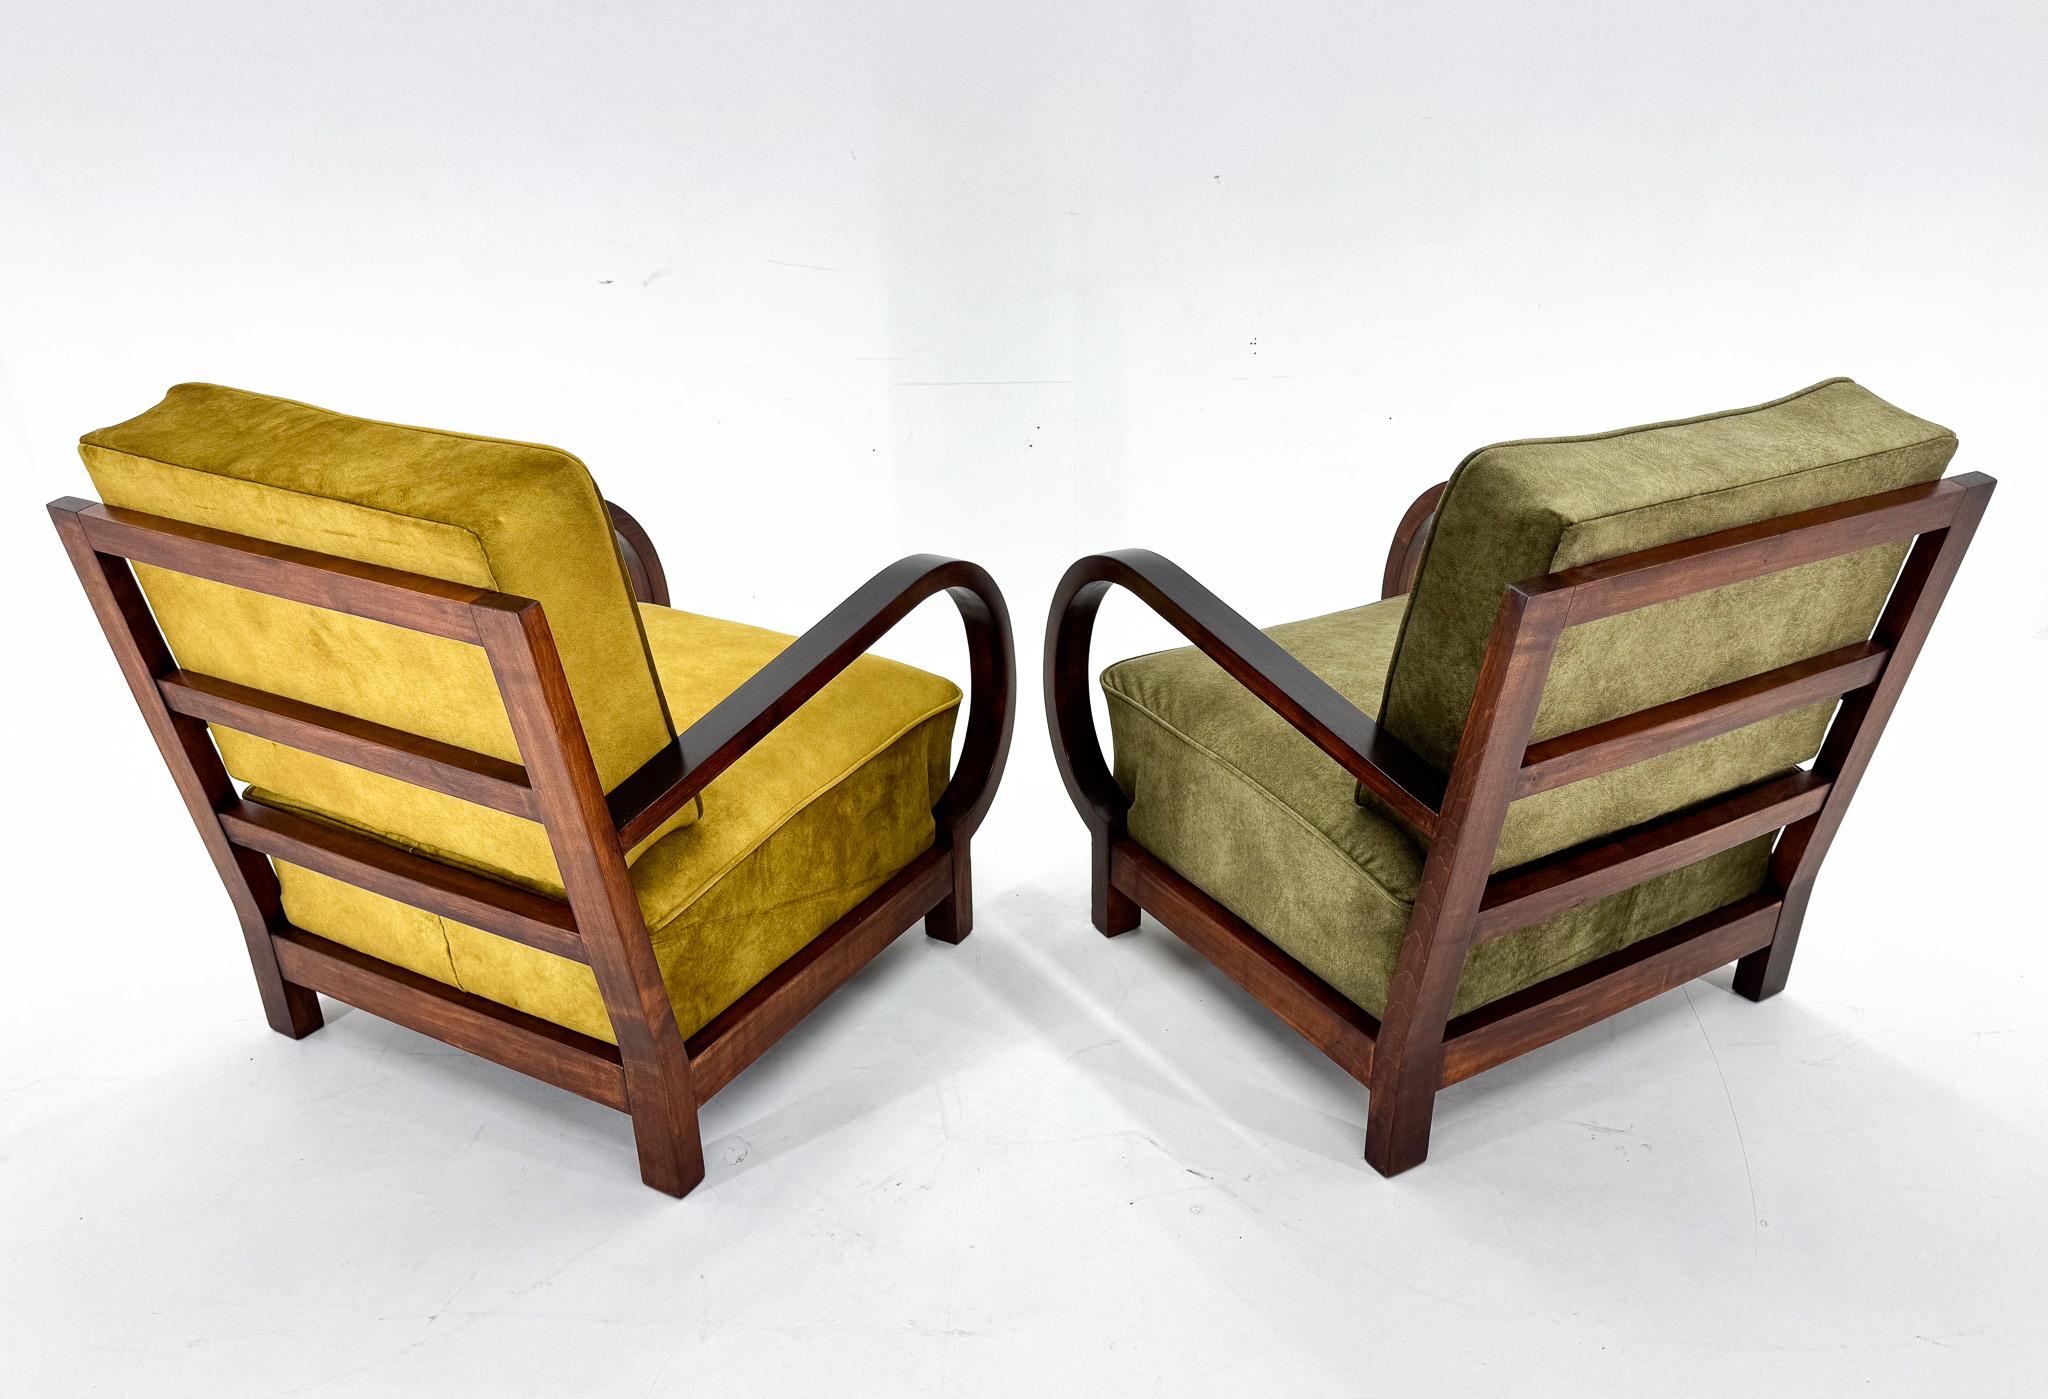 Pair of Art Deco Beech Wood Armchairs, 1930's, Newly Upholstered In Good Condition For Sale In Praha, CZ